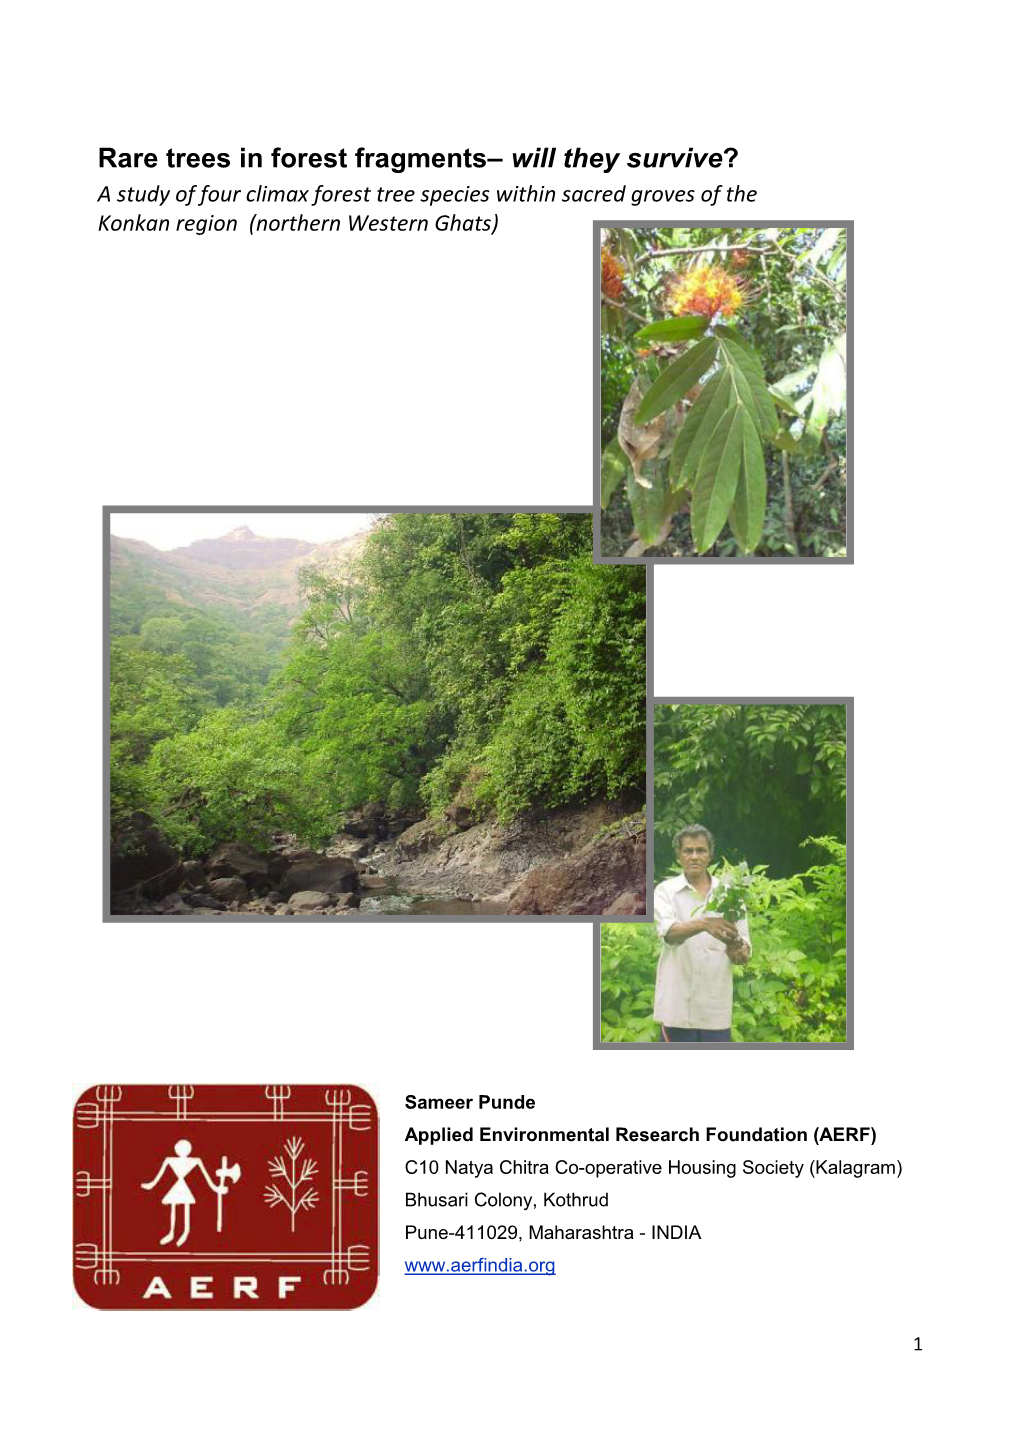 Rare Trees in Forest Fragments– Will They Survive? a Study of Four Climax Forest Tree Species Within Sacred Groves of the Konkan Region (Northern Western Ghats)